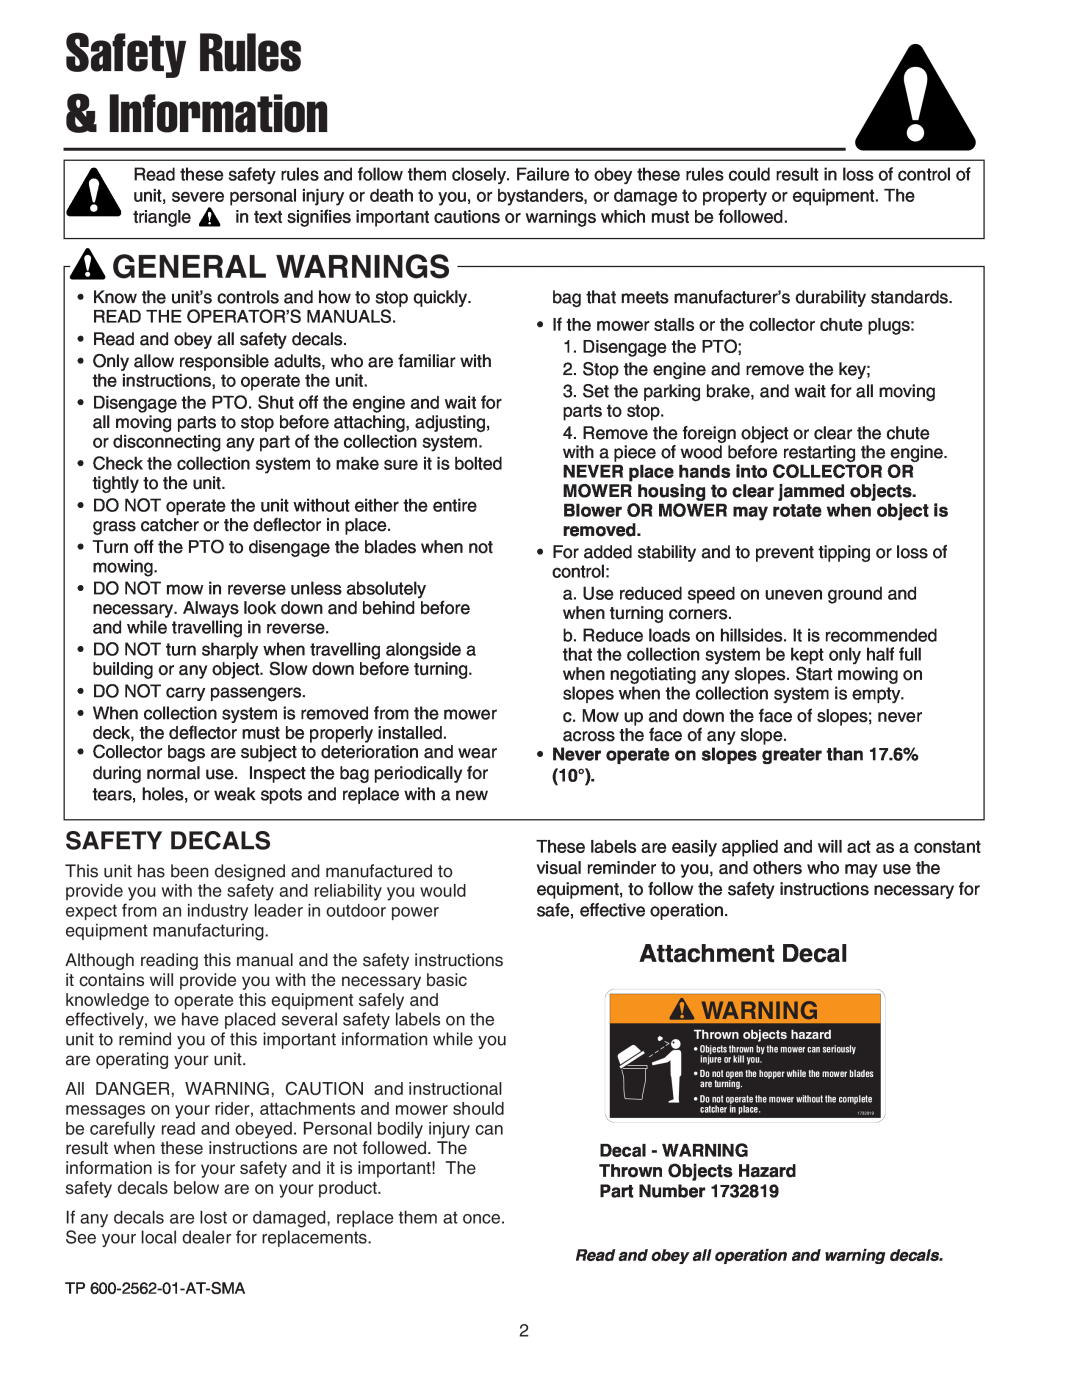 Snapper 1695164 manual Safety Rules Information, Safety Decals, Attachment Decal, General Warnings 